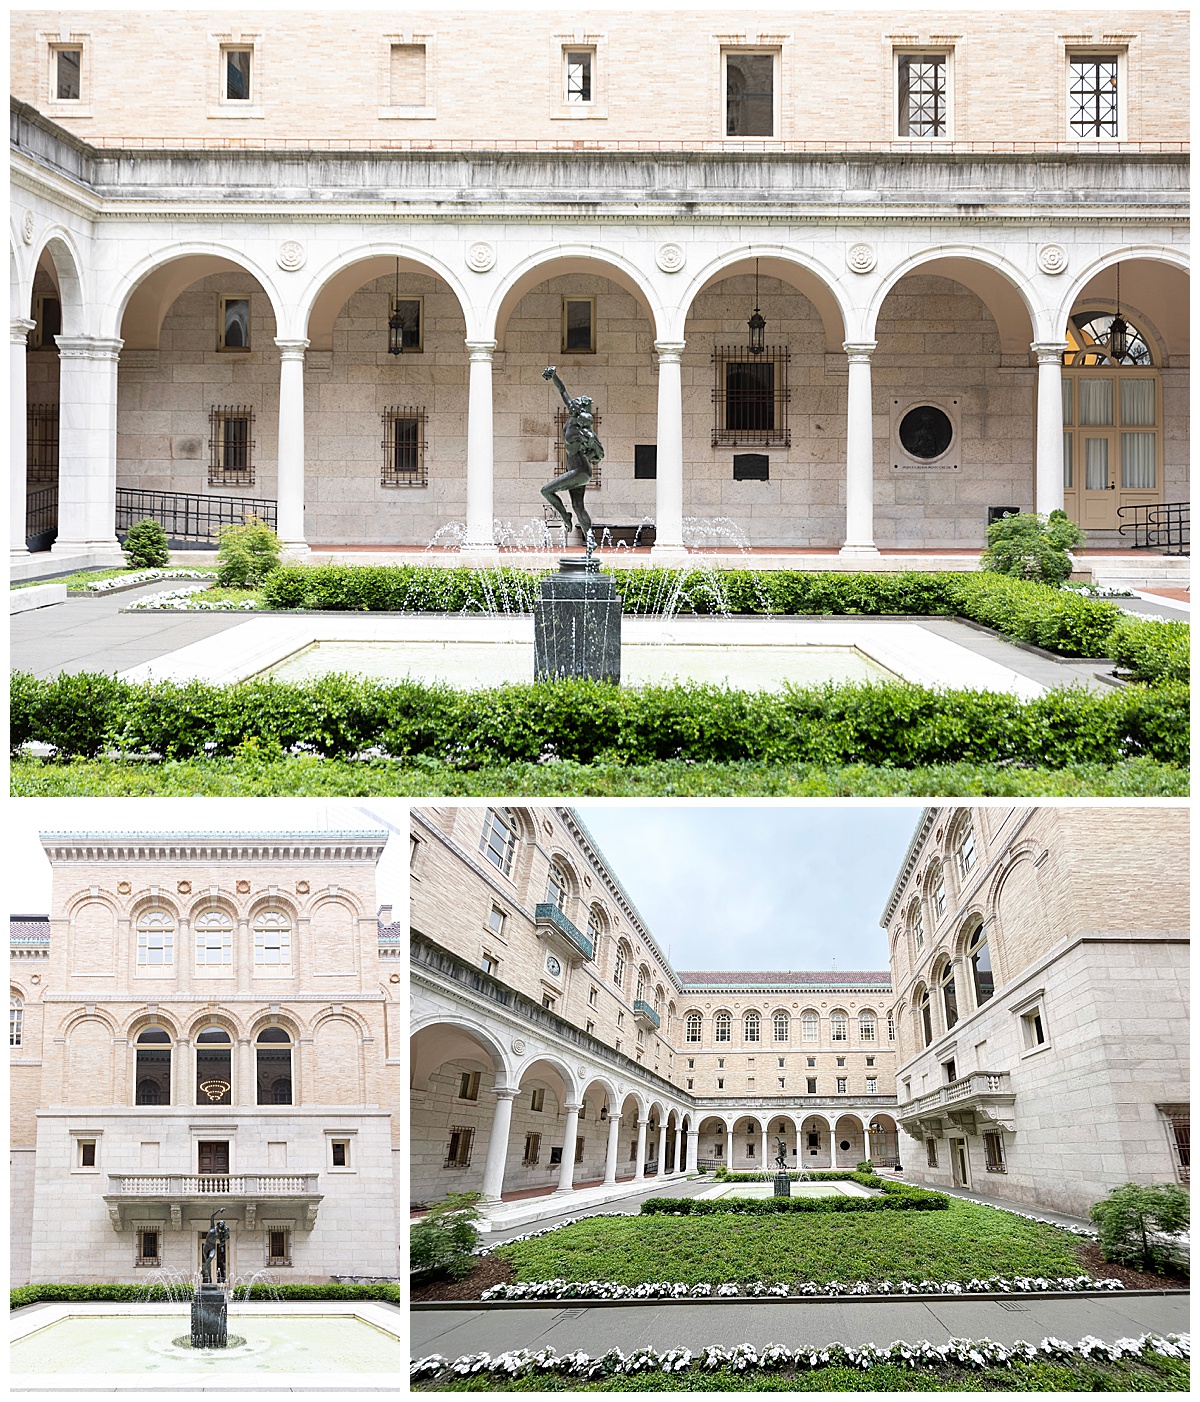 The Courtyard at the Boston Public Library is a popular ceremony location offering elegance and beauty amidst the striking architecture, lush gardens, and a beautiful water fountain. This outdoor space is able to accommodate up to 200 seated for a ceremony, 225 for a cocktail reception, and up to 60 seated for dinner.